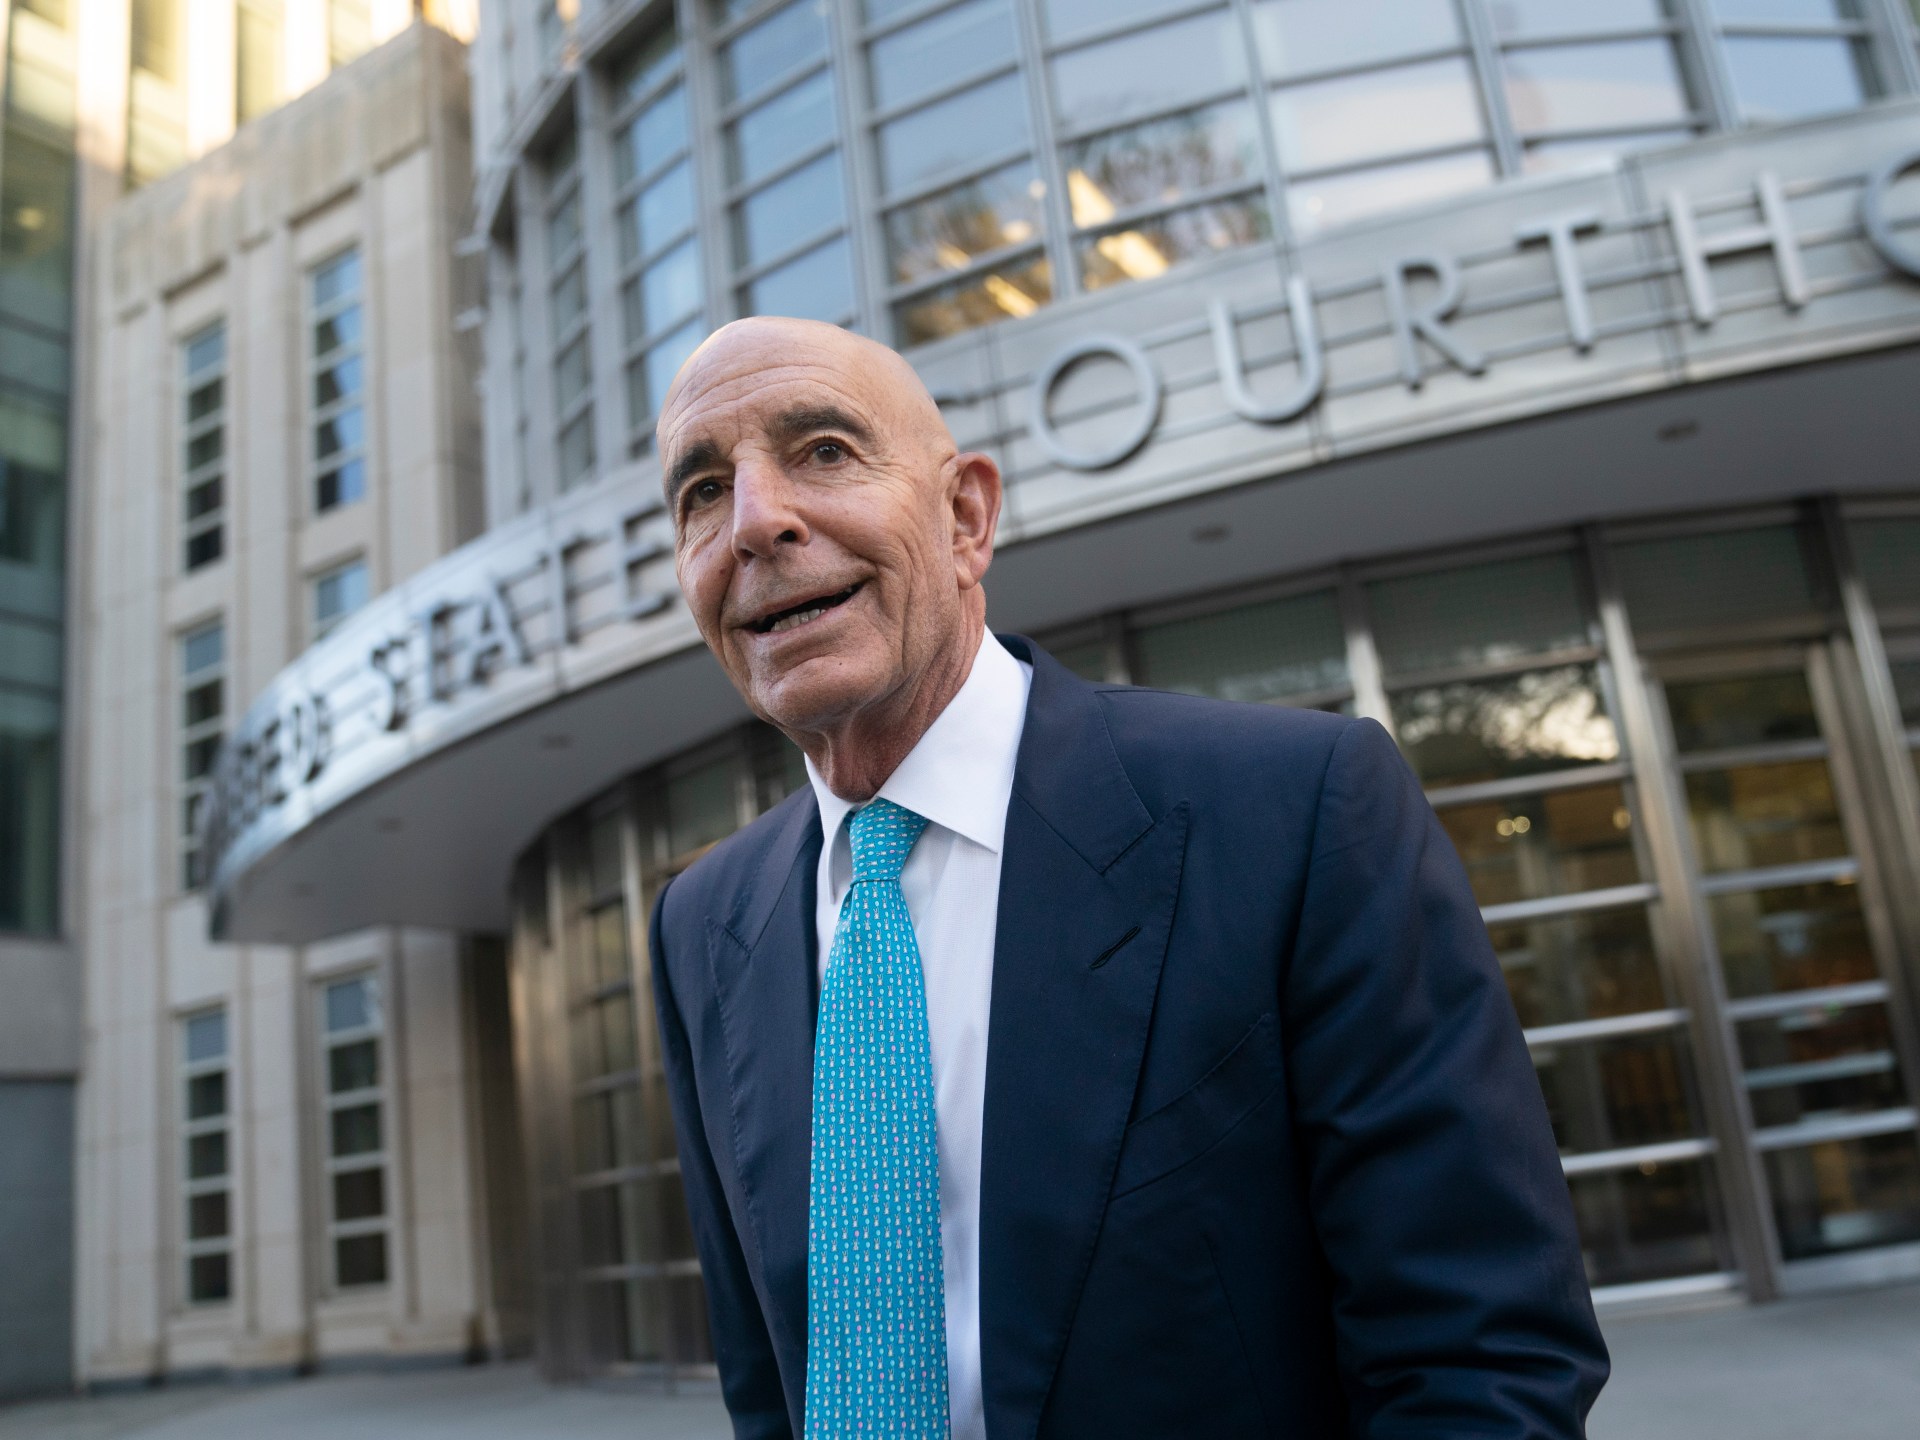 Trump ally Tom Barrack acquitted of illicit UAE lobbying | Donald Trump News